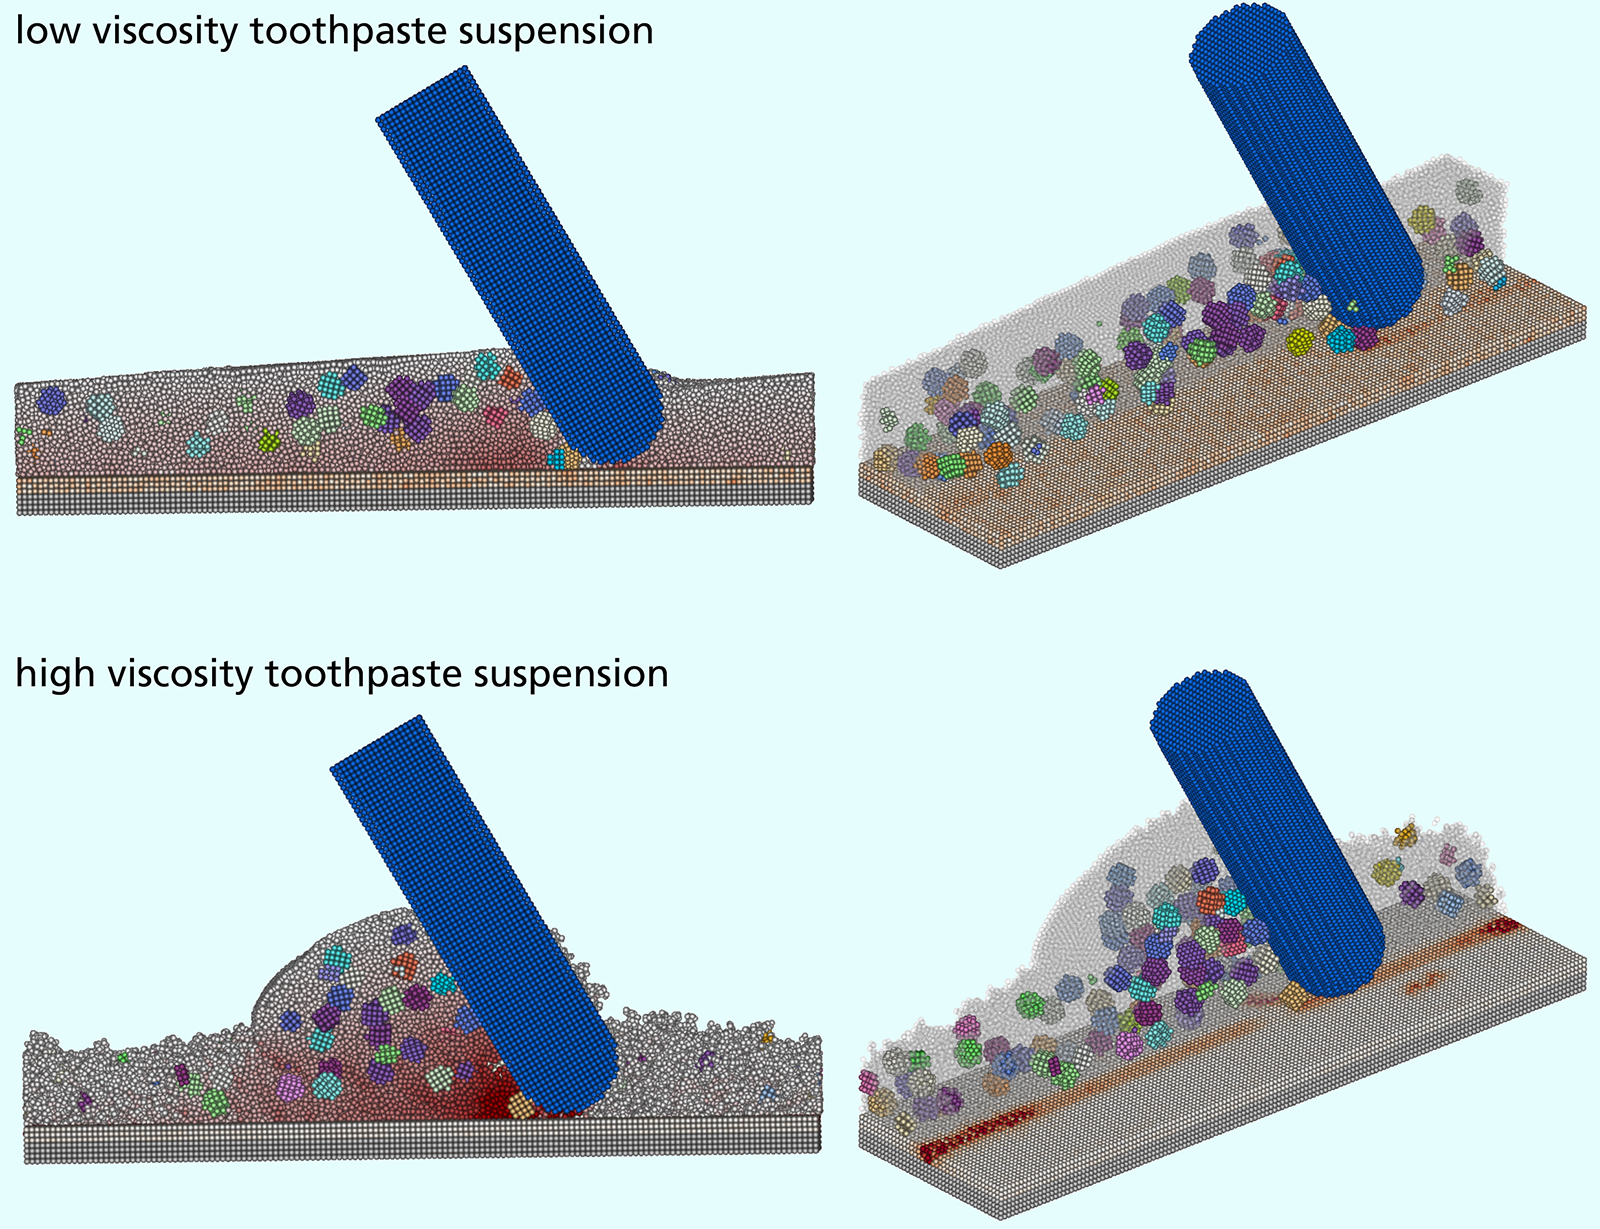 Simulation of pressure distribution in suspensions of varying viscosities with spherical abrasive particles as a toothbrush bristle rubs against the tooth enamel: the more viscous toothpaste suspension leads to greater abrasion on the tooth enamel. Above: lower viscosity 1 mPas, below: higher viscosity 20 mPas.  Left: pressure distribution in the suspension (a deeper red indicates higher pressure), right: stress input against the tooth enamel by abrasive particles (a deeper red indicates greater abrasion).